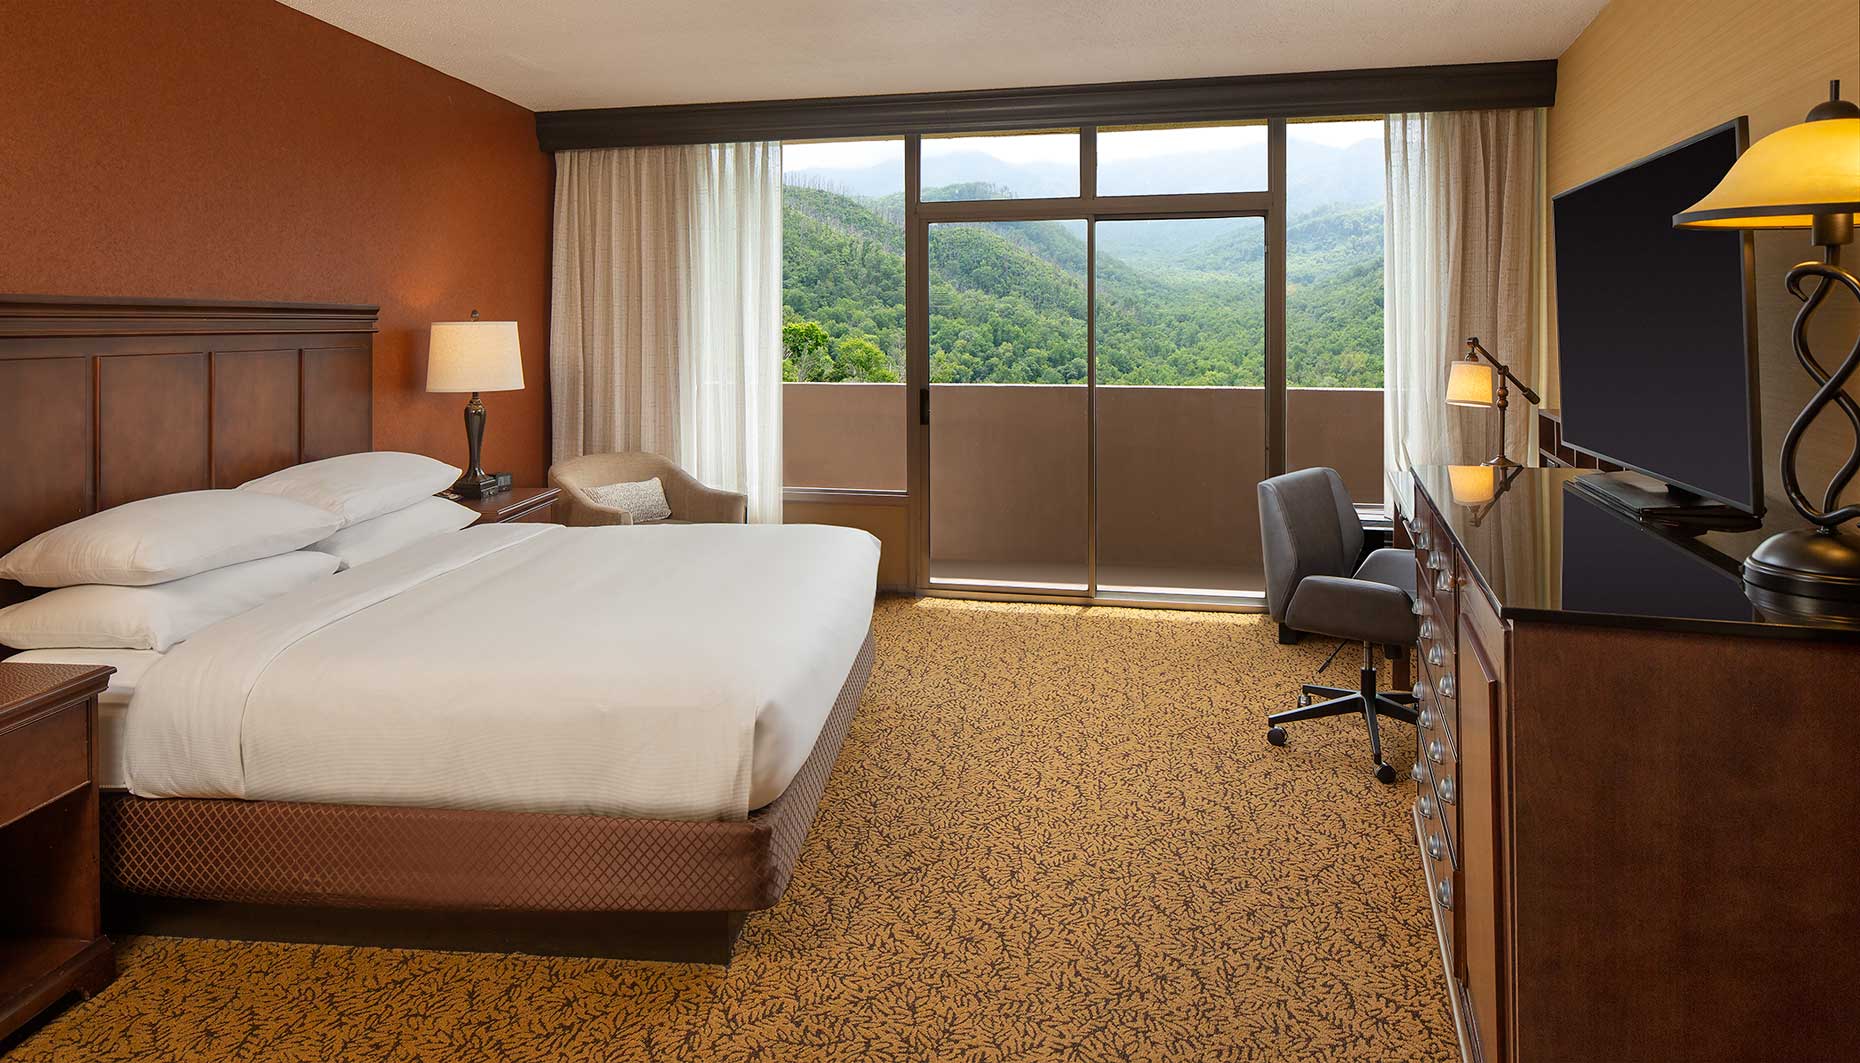 A view of a guest room and the beautiful mounting view out the window at Park Vista Doubletree Hotel